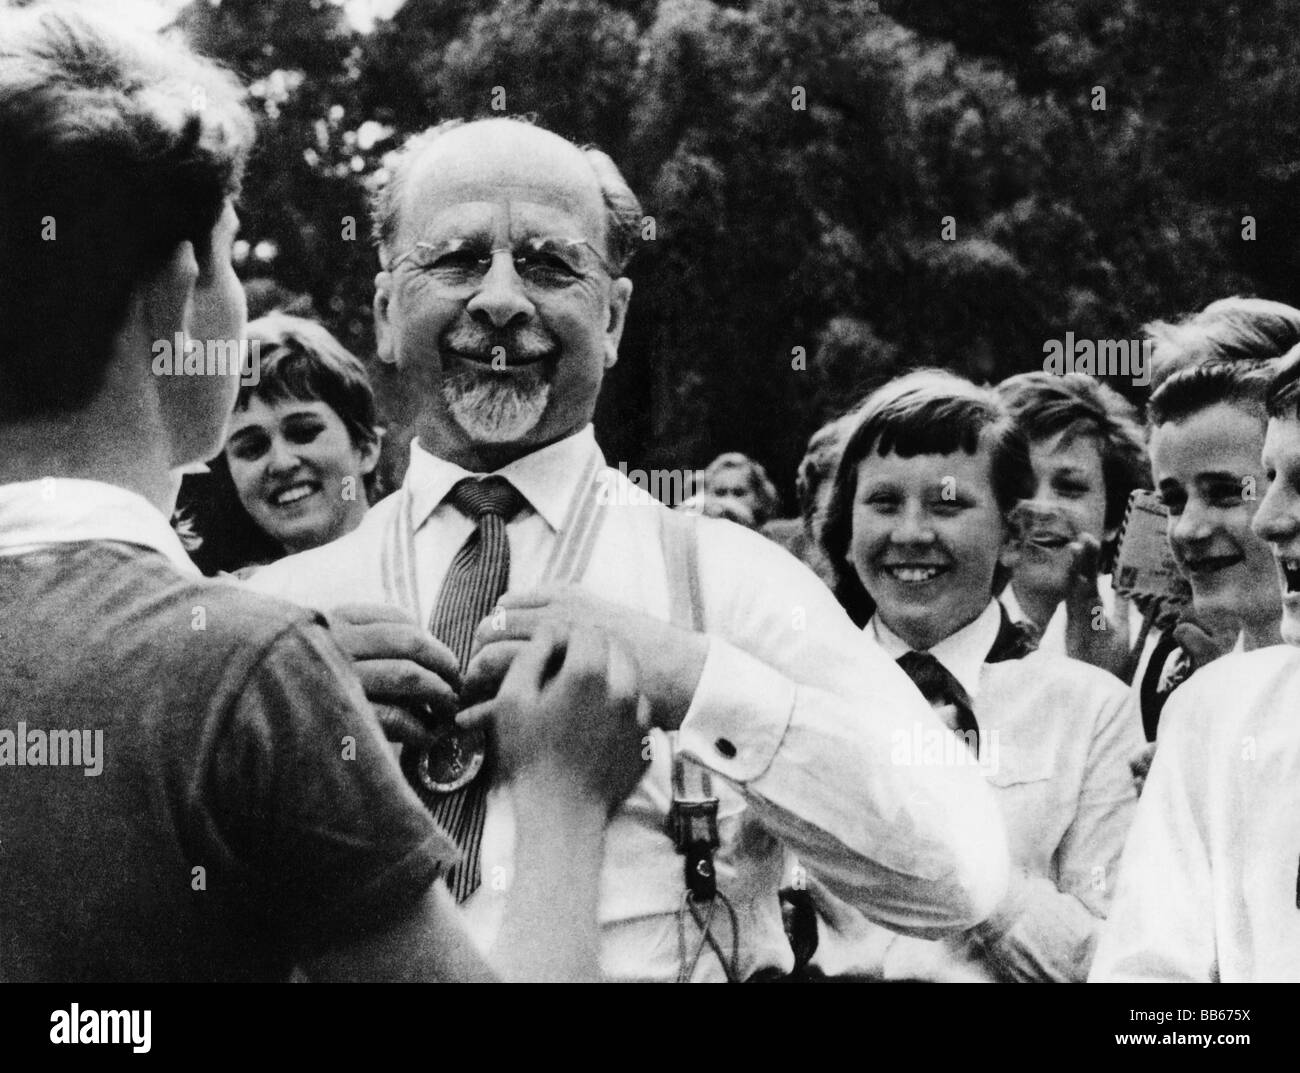 Ulbricht, Walter, 30.6.1893 - 1.8.1973, German politician (SED), Chairman of State Council of the German Democratic Republic 12.9.1960 - 1.8.1973, with Young Pioneers, 1960s, , Stock Photo